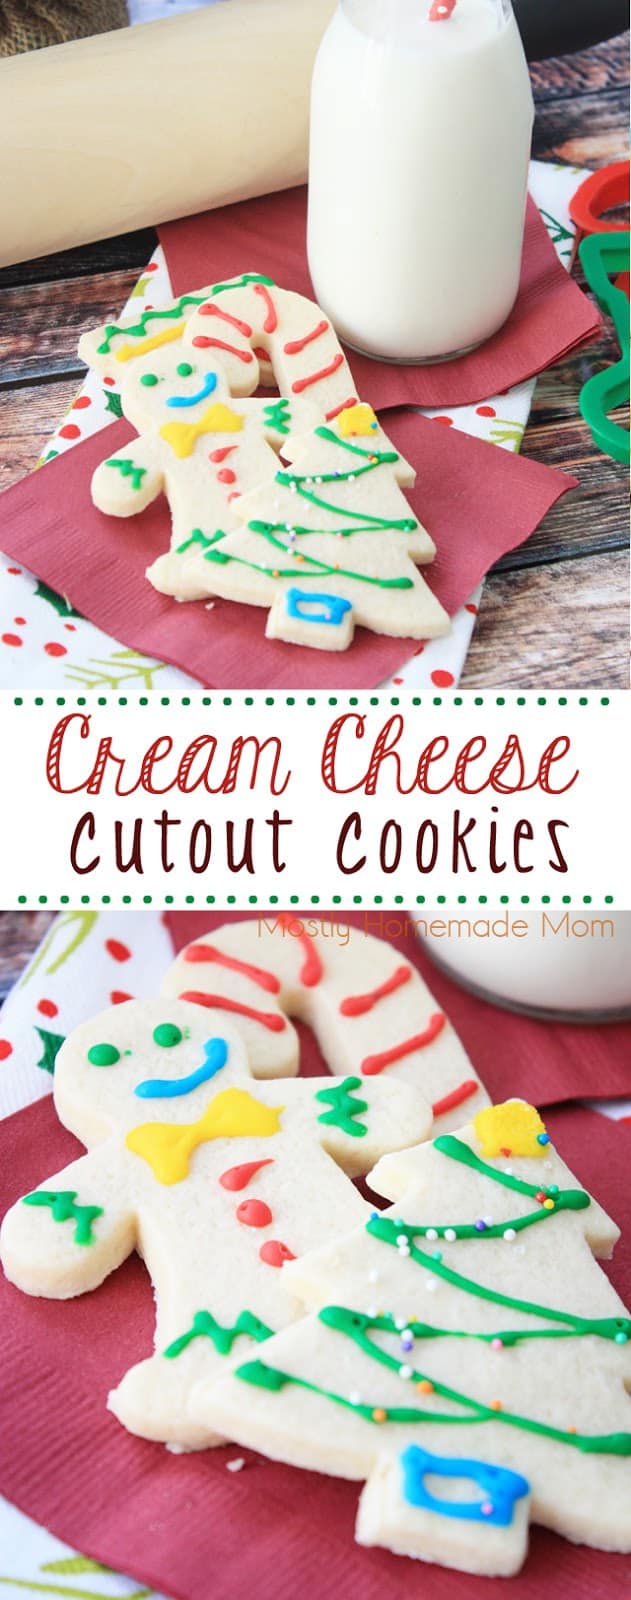 Cream Cheese Cutout Cookies (VIDEO) - Mostly Homemade Mom